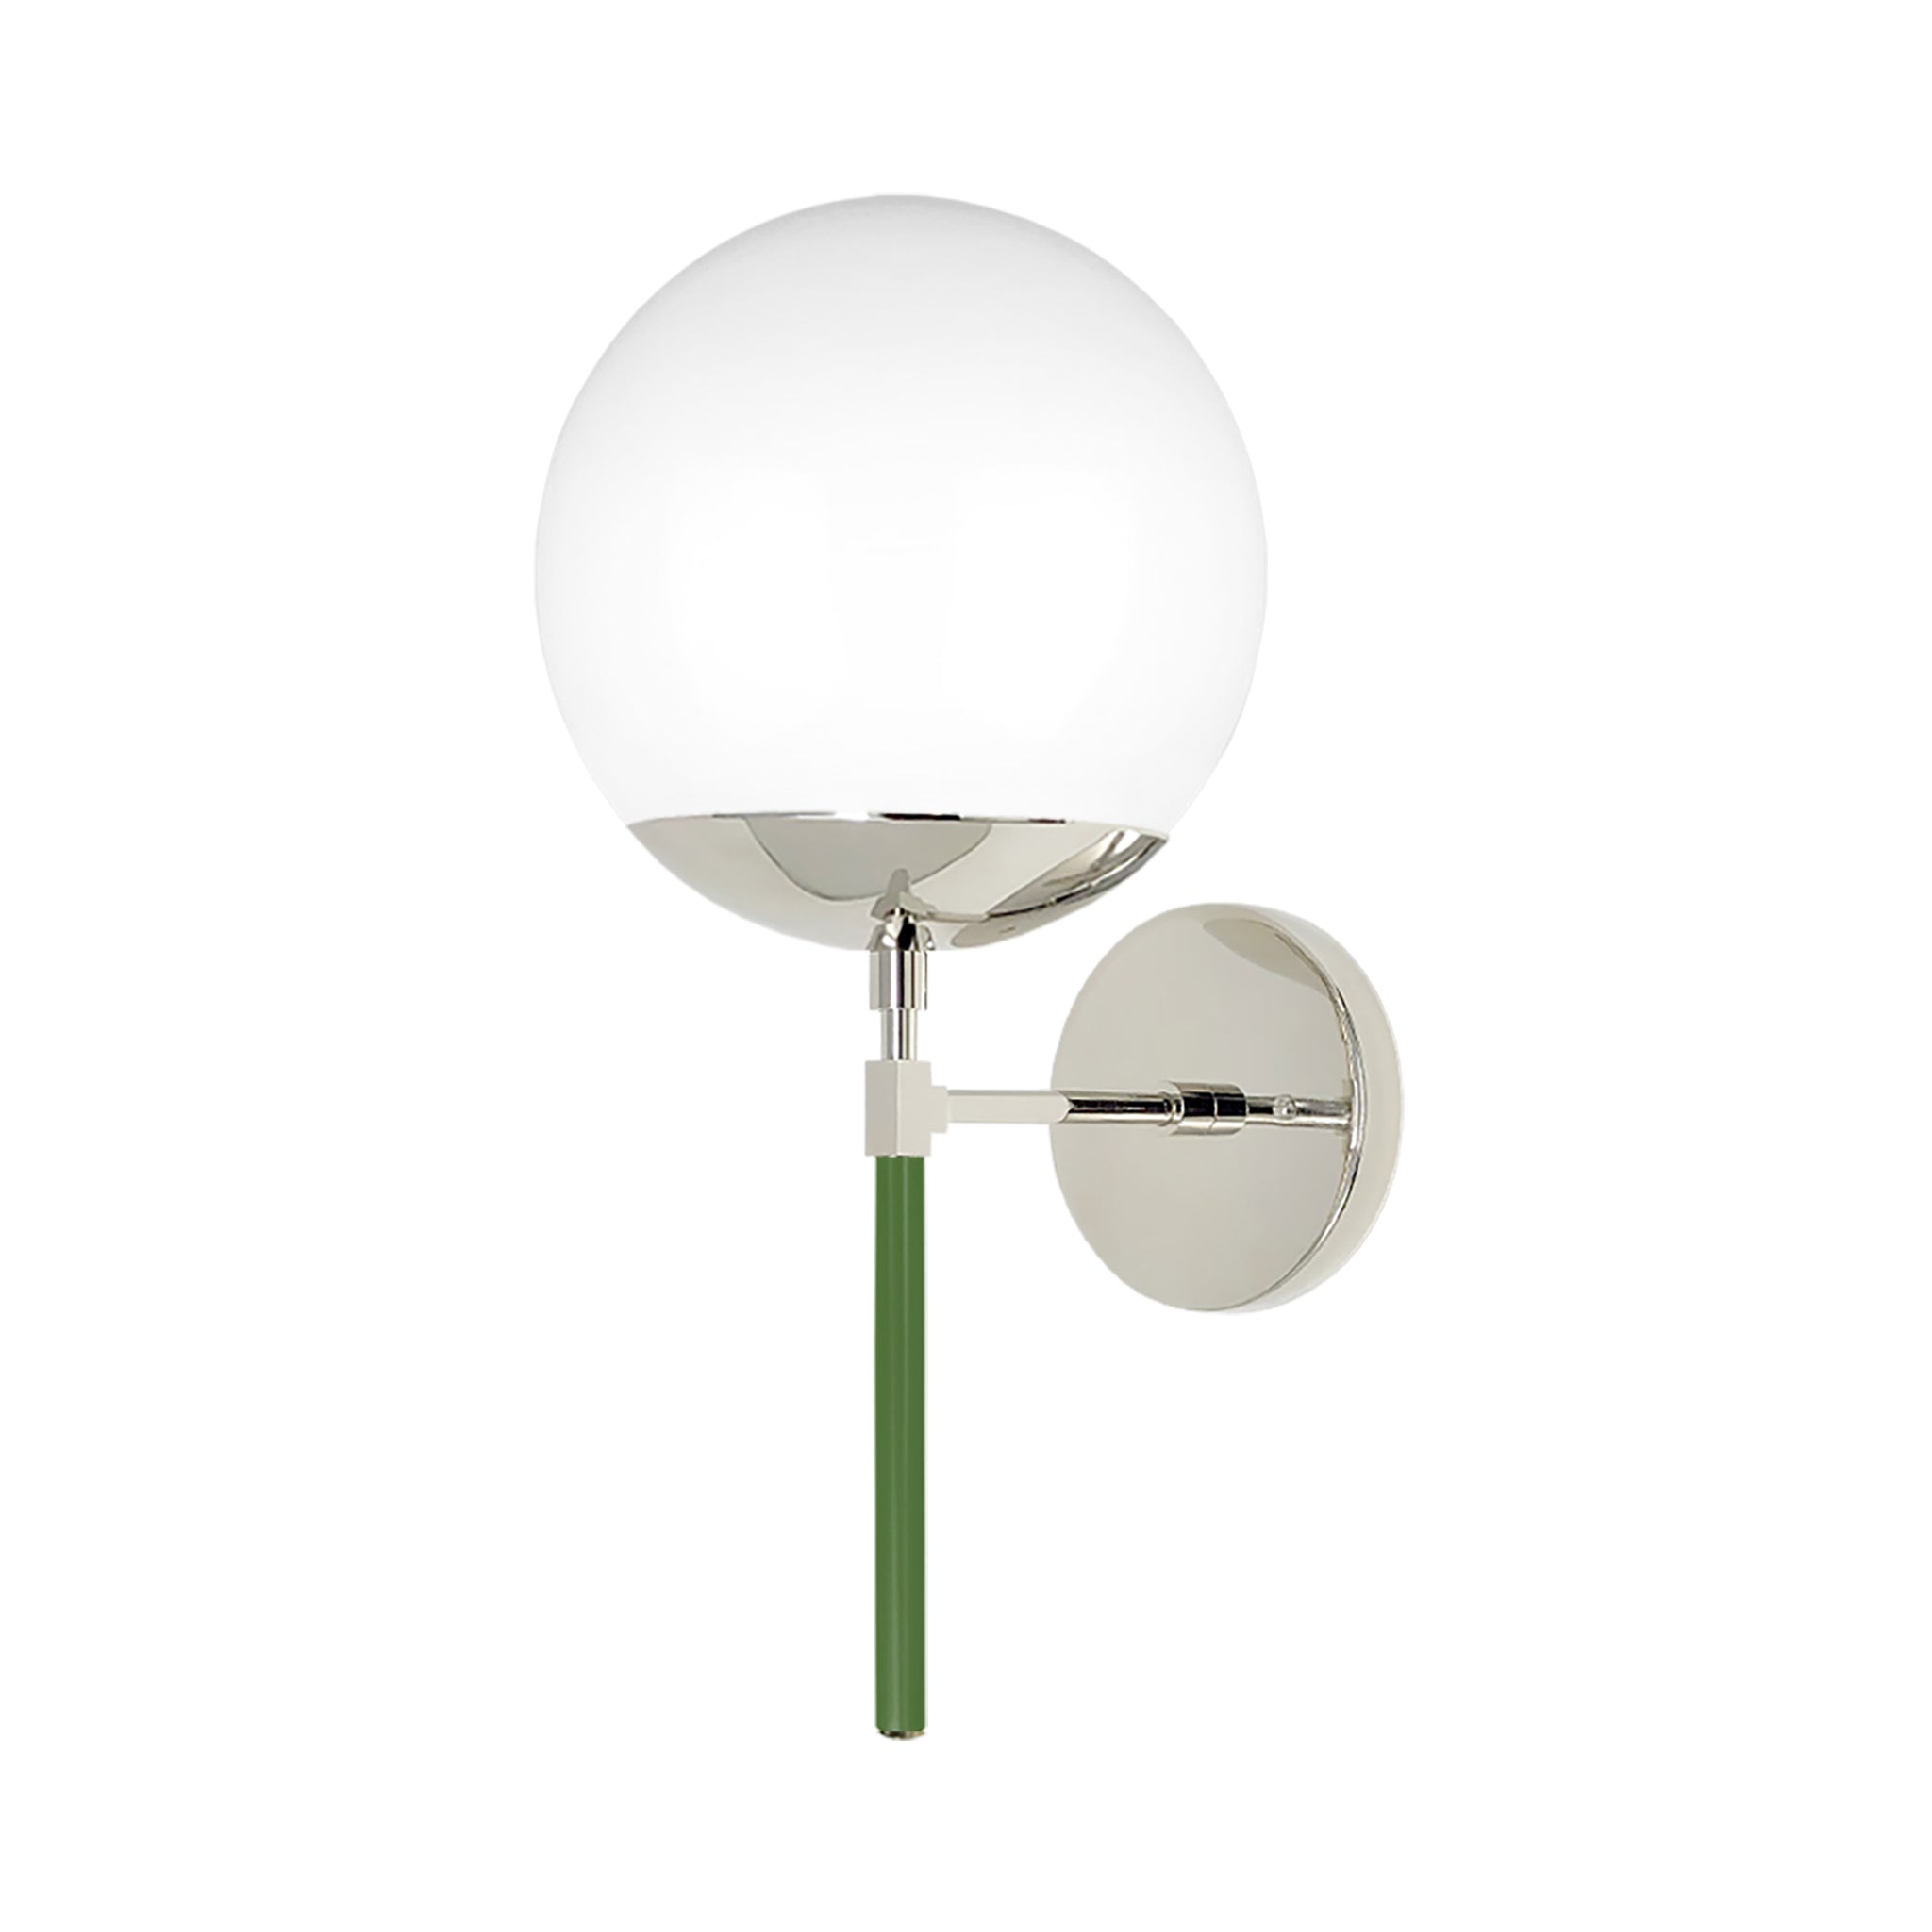 Nickel and lagoon color Lolli sconce 8" Dutton Brown lighting